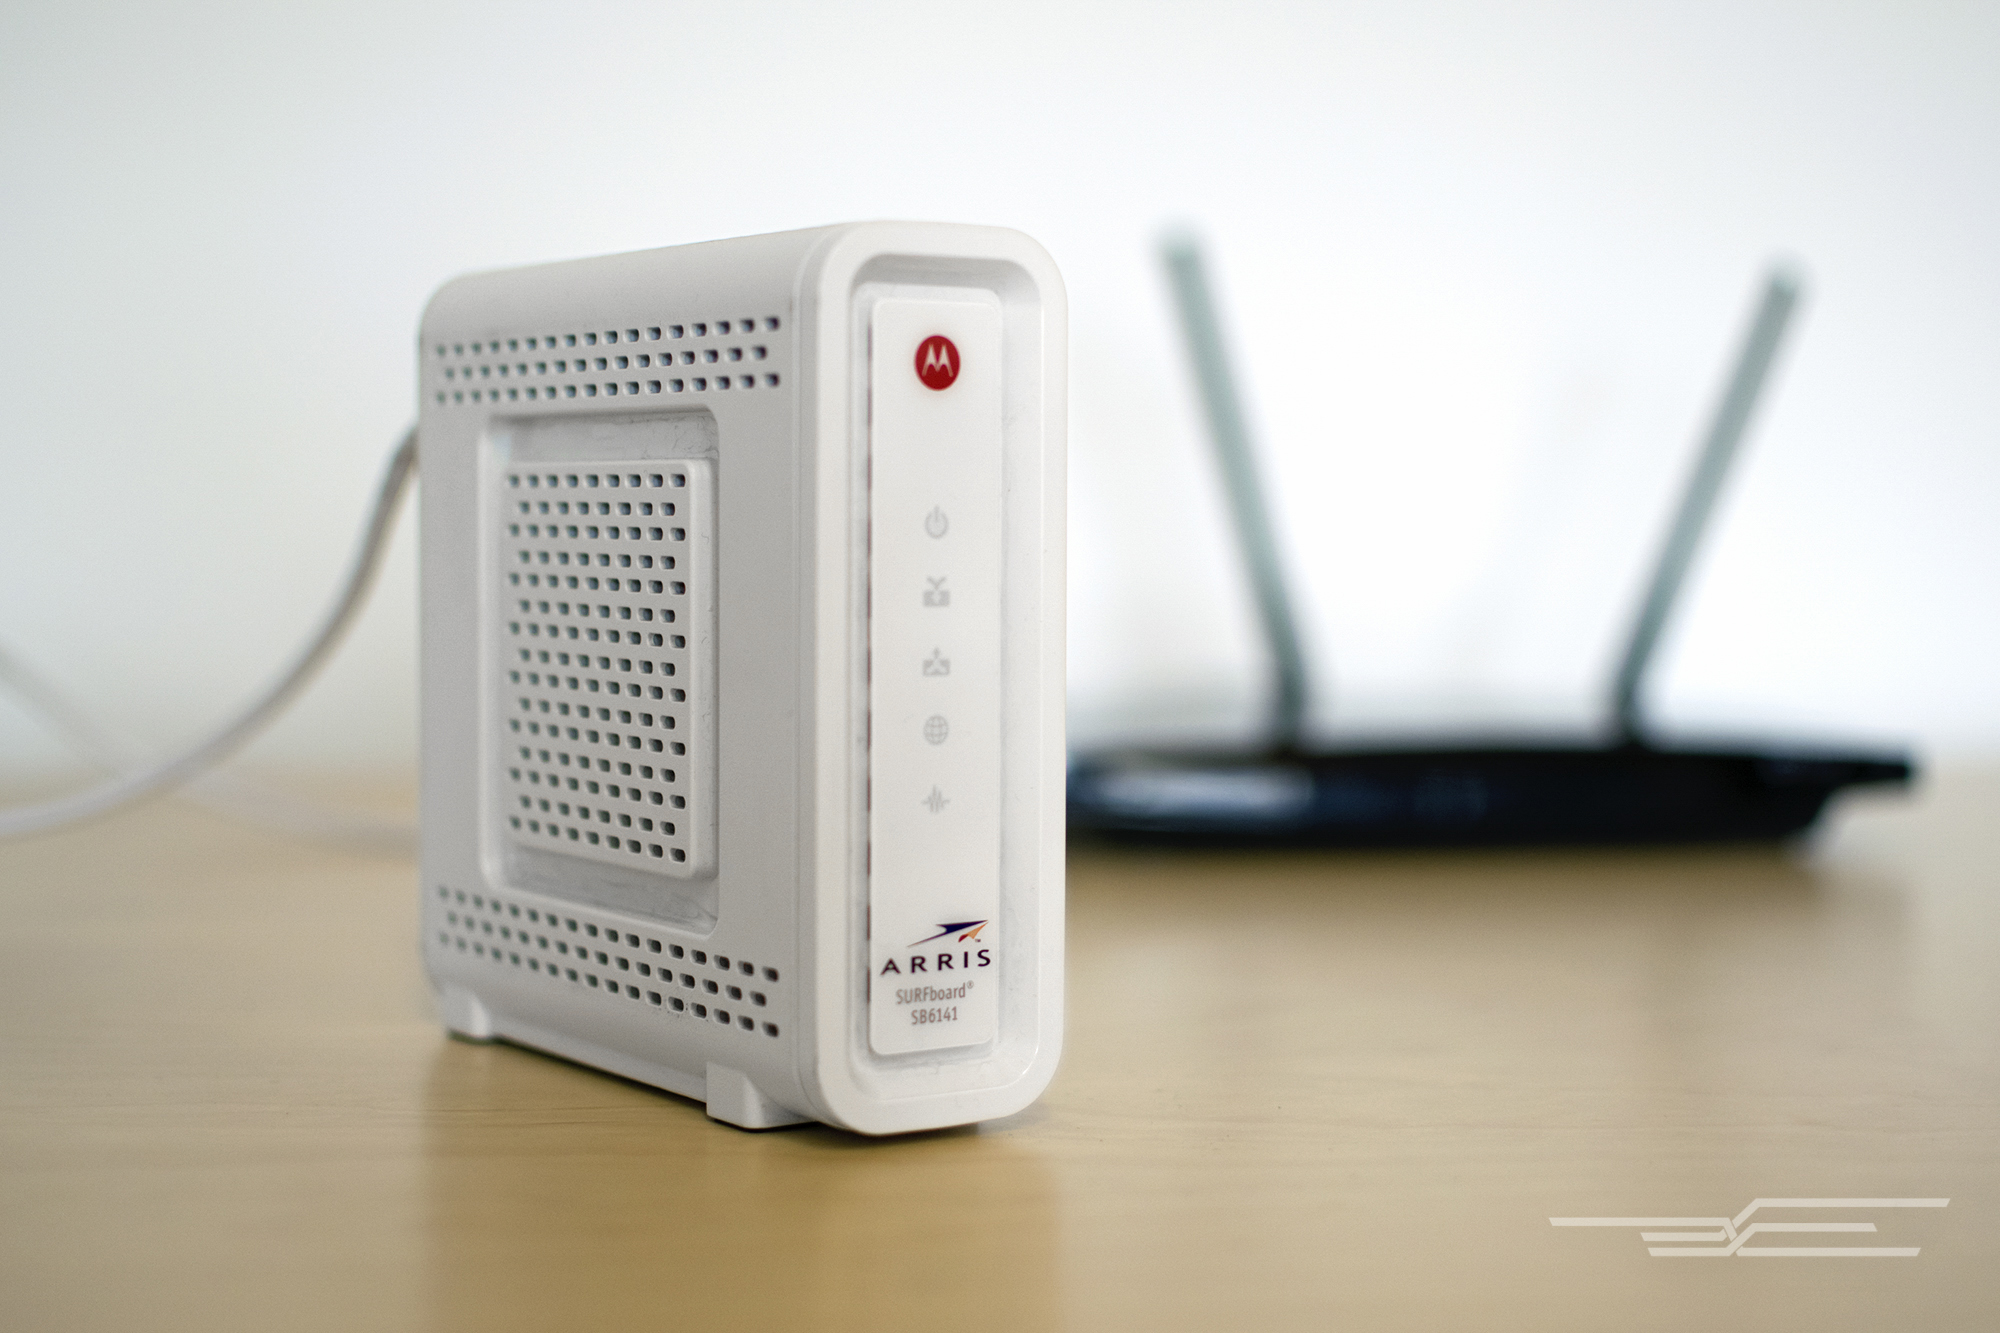 The best cable modem